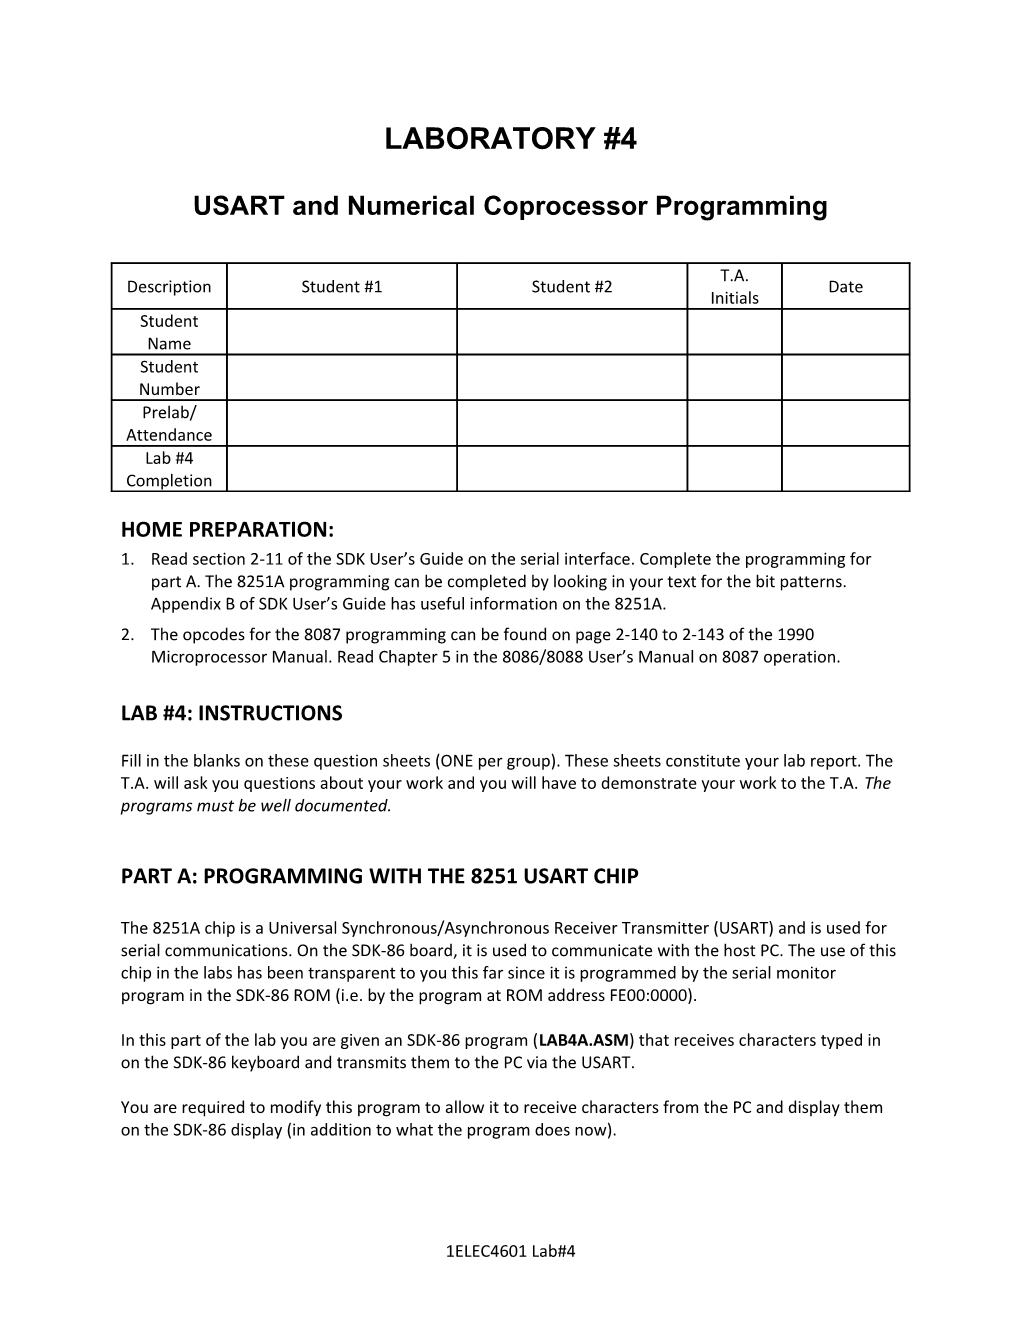 USART and Numerical Coprocessor Programming